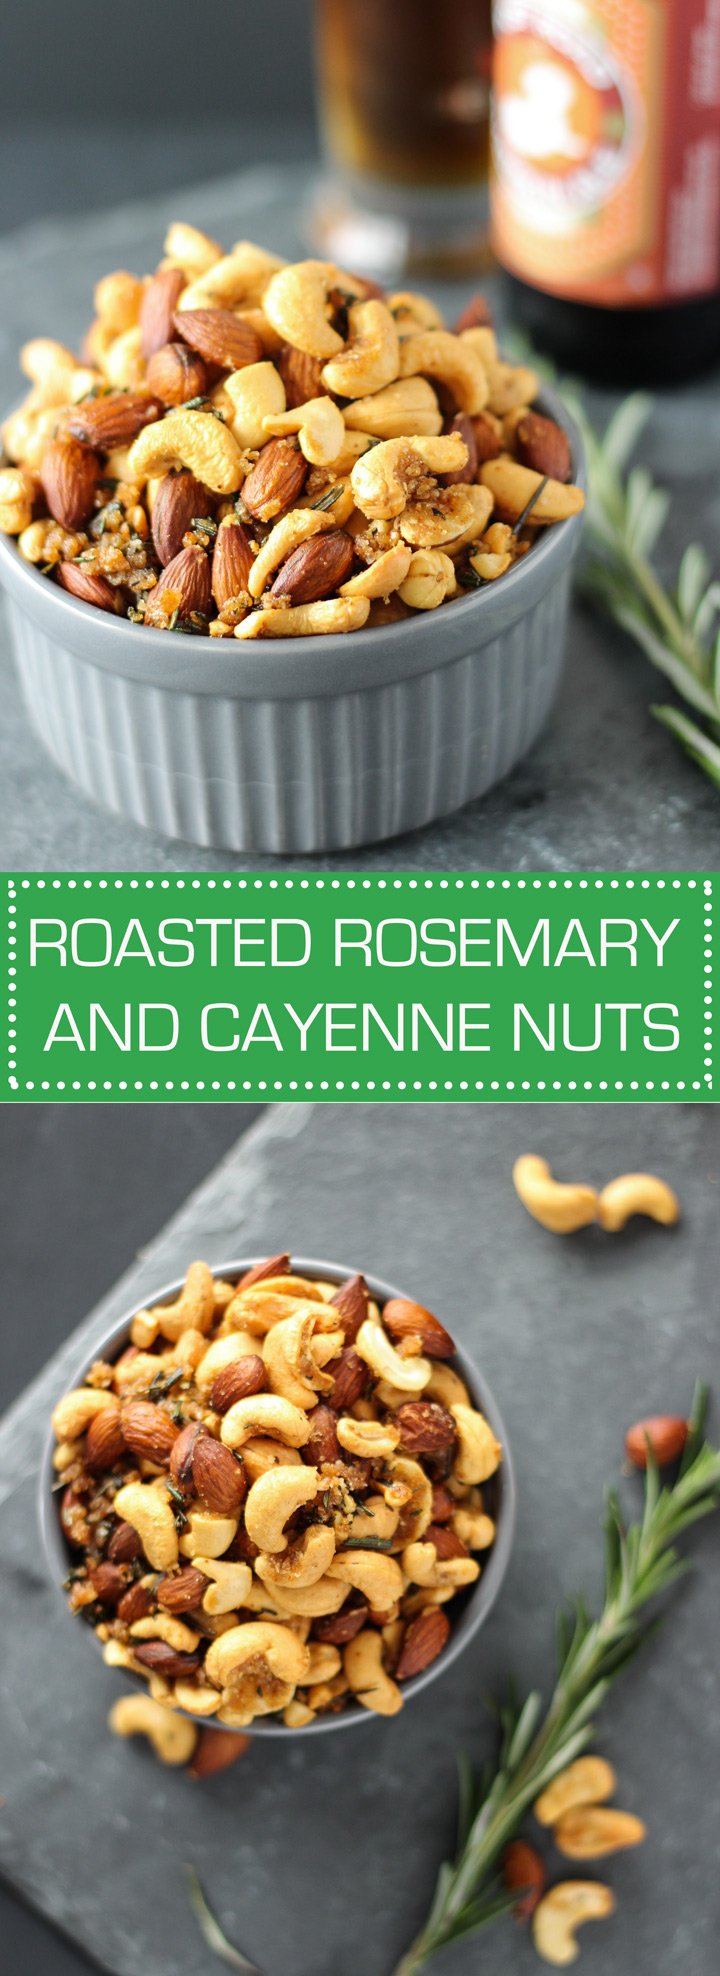 Roasted Rosemary and Cayenne Nuts - the perfect snack to have on Football Sunday!